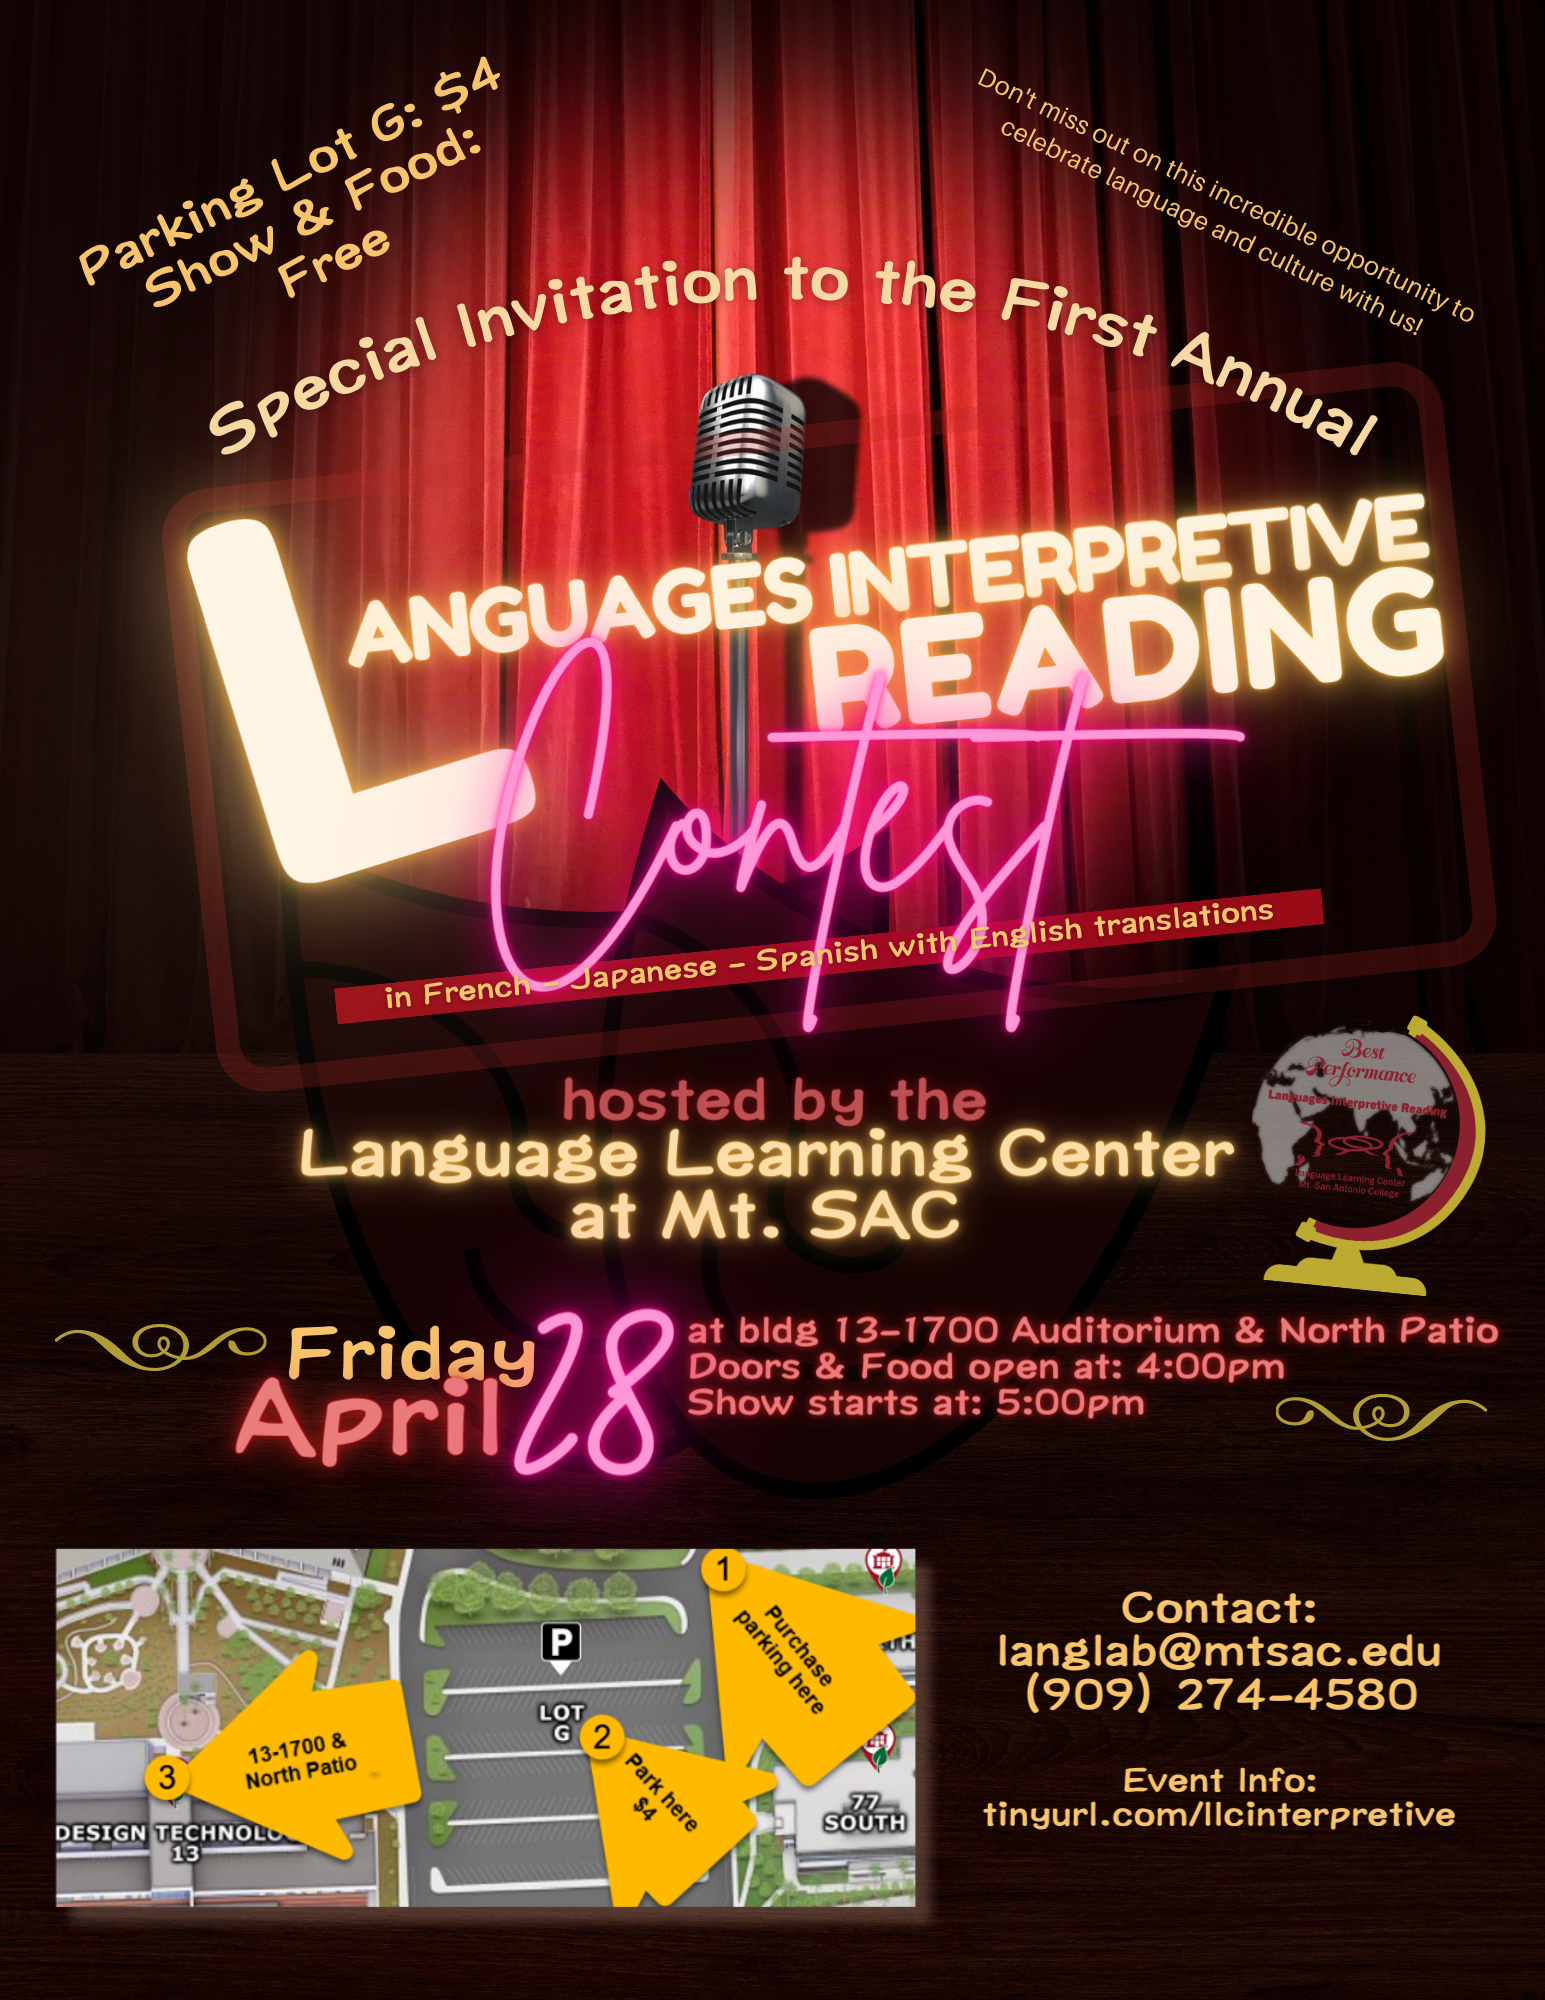 Be part of the audience for this special language and cultural event!